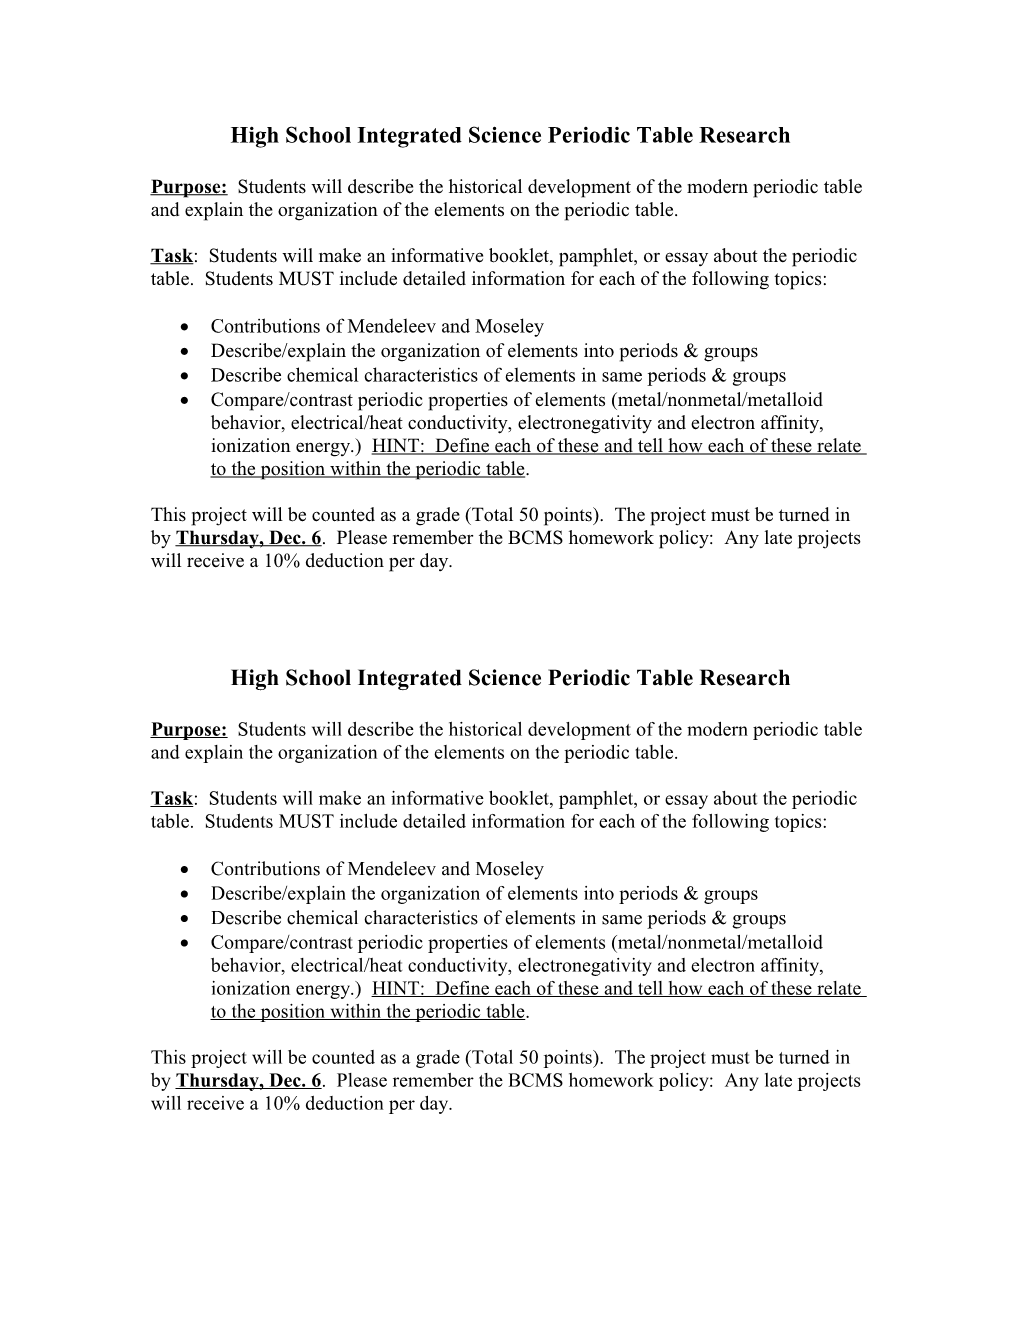 High School Integrated Science Periodic Table Research